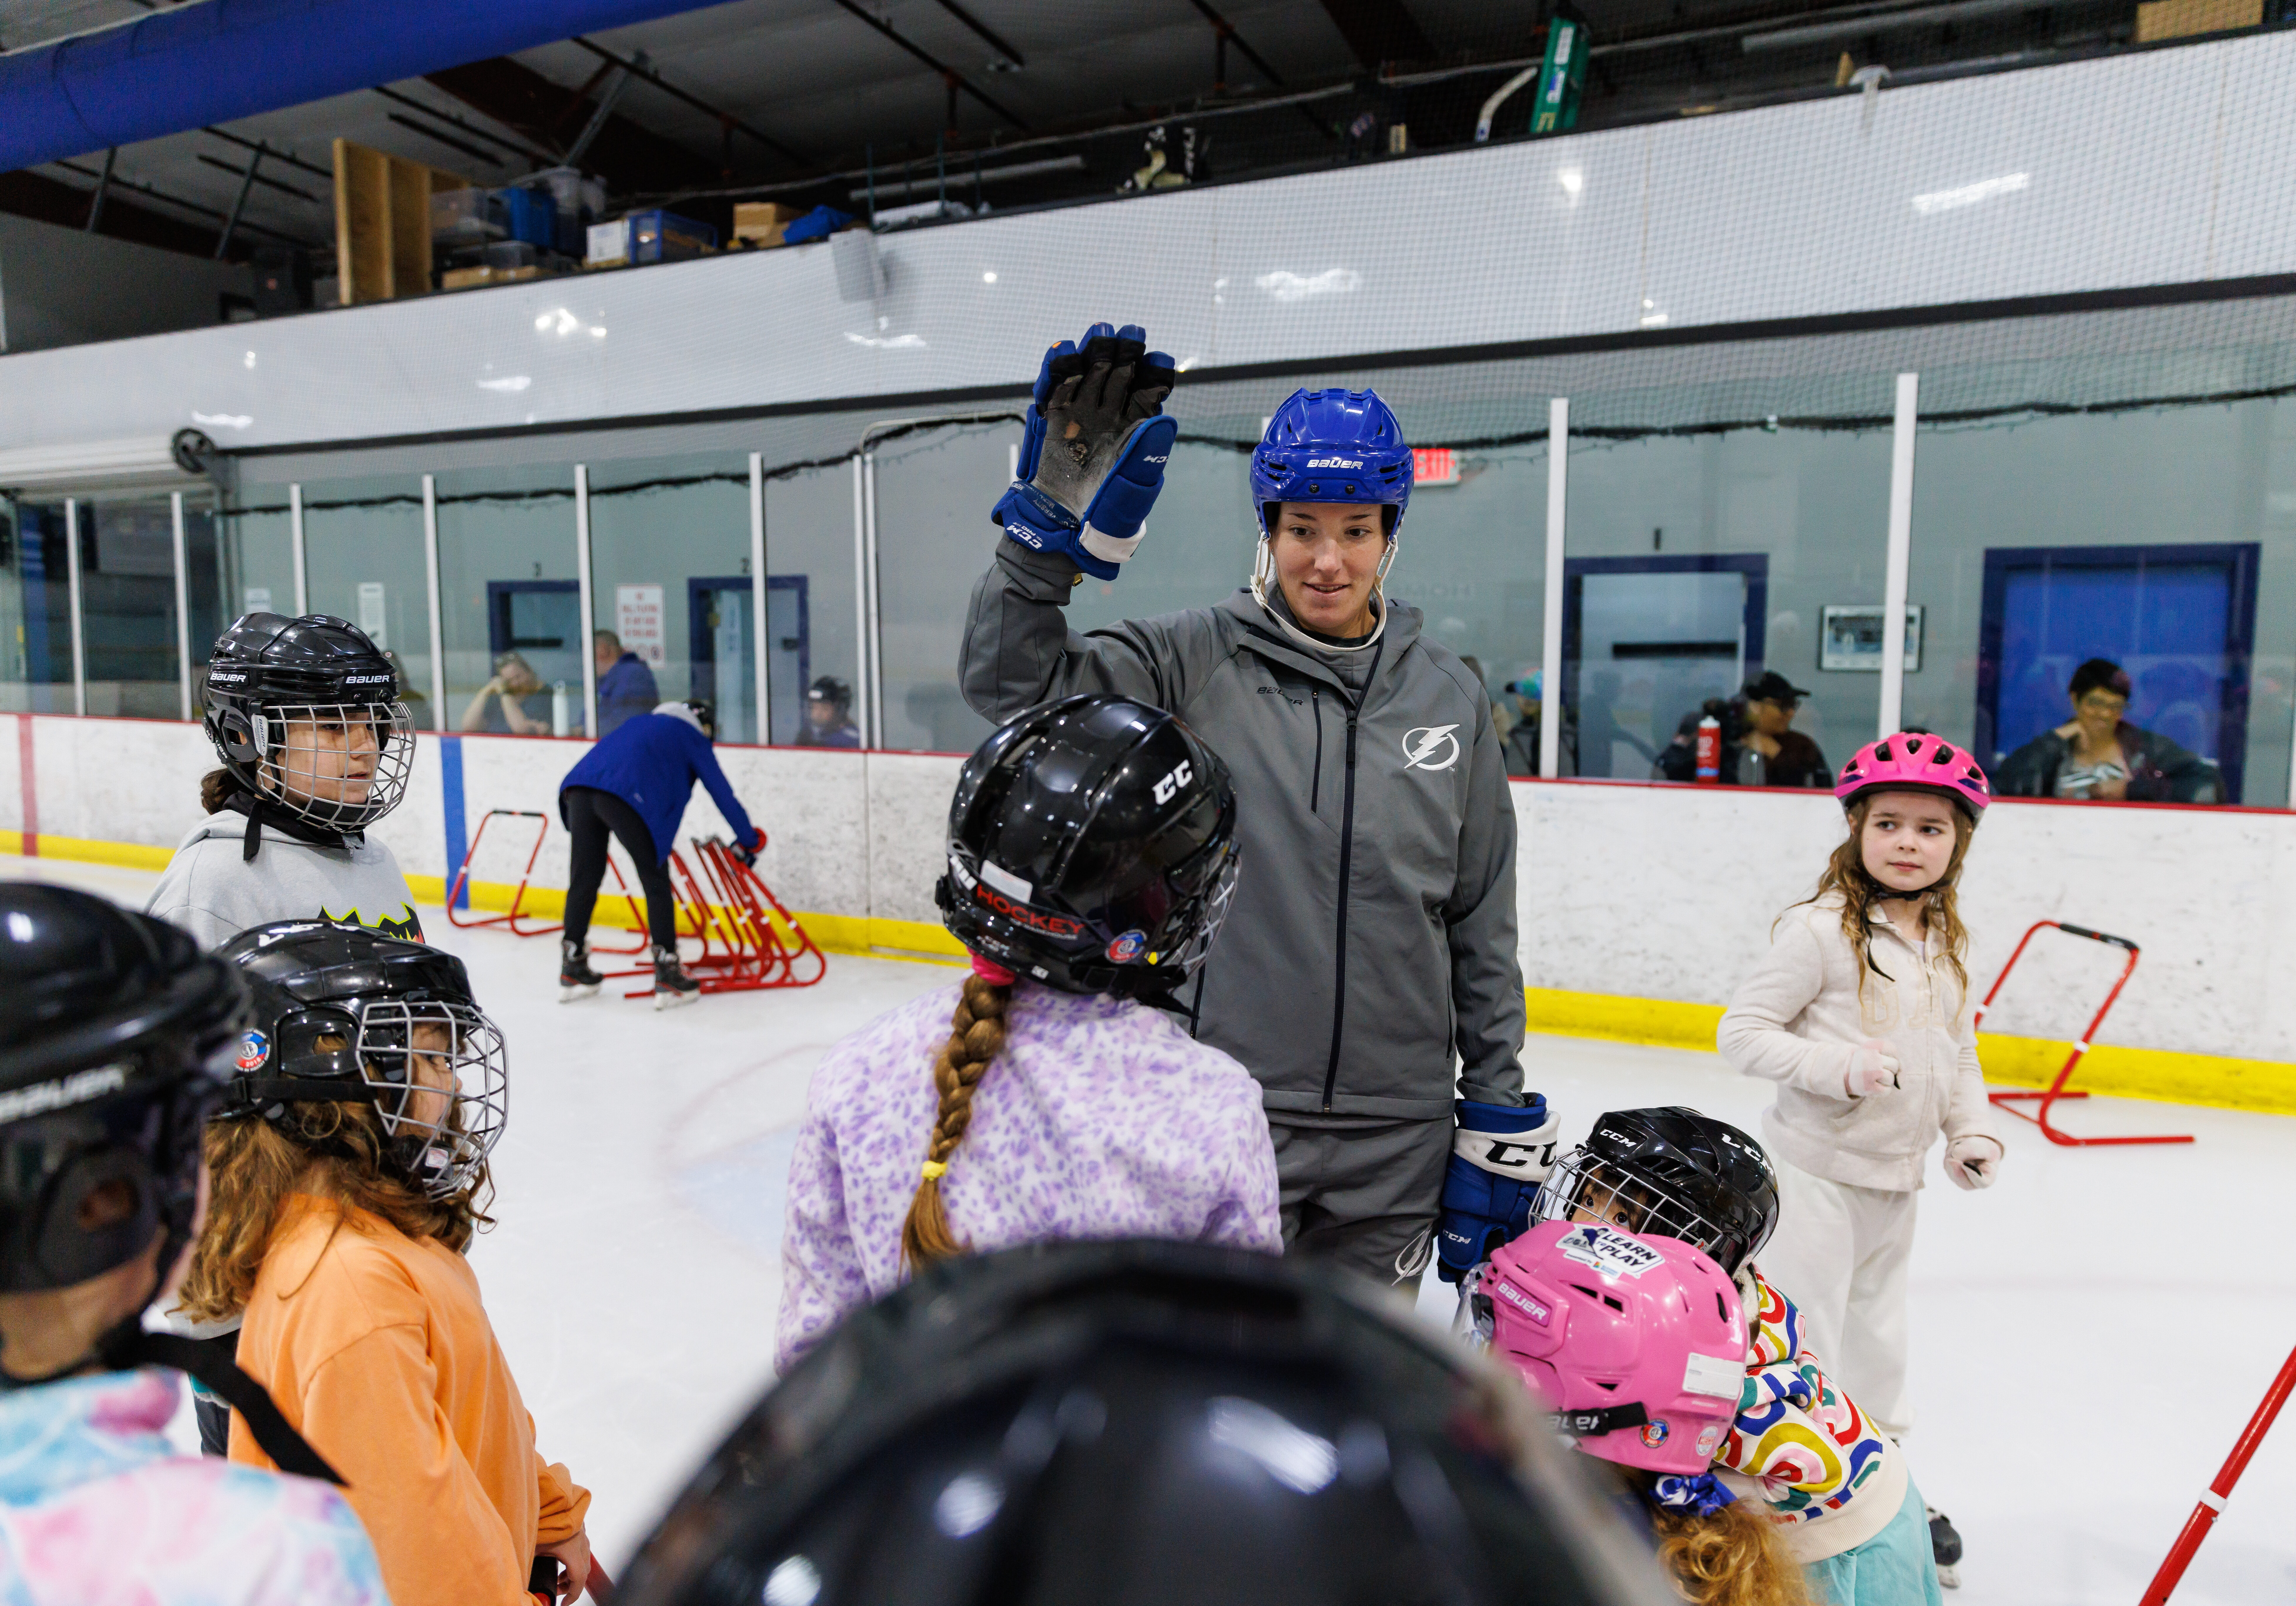 TAMPA, FL - JANUARY 29: Kids ages 5-10 participate in the Tampa Bay Lightning Learn to Skate hockey program at Xtra Ice Power Pole on Sunday, January 29, 2023 in Tampa, Florida. The Tampa Bay Lightning are committed to providing girls within Florida and the Tampa Bay Area a safe, competitive environment to grow their individual hockey skills while promoting the enjoyment, appreciation and understanding of hockey. 
(Photo by Casey Brooke Lawson/Tampa Bay Lightning)